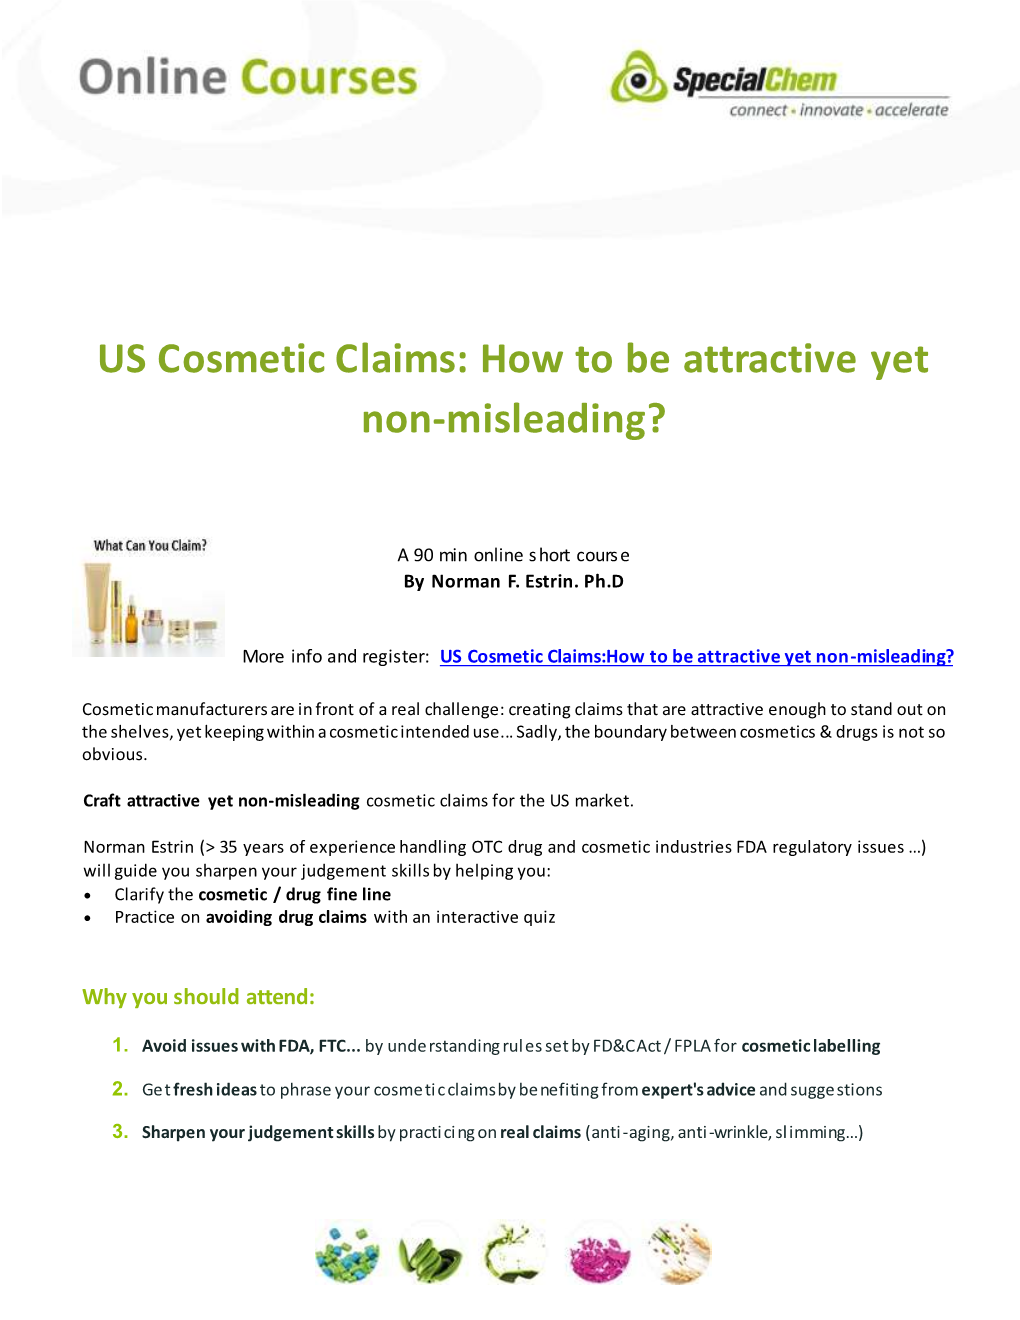 US Cosmetic Claims: How to Be Attractive Yet